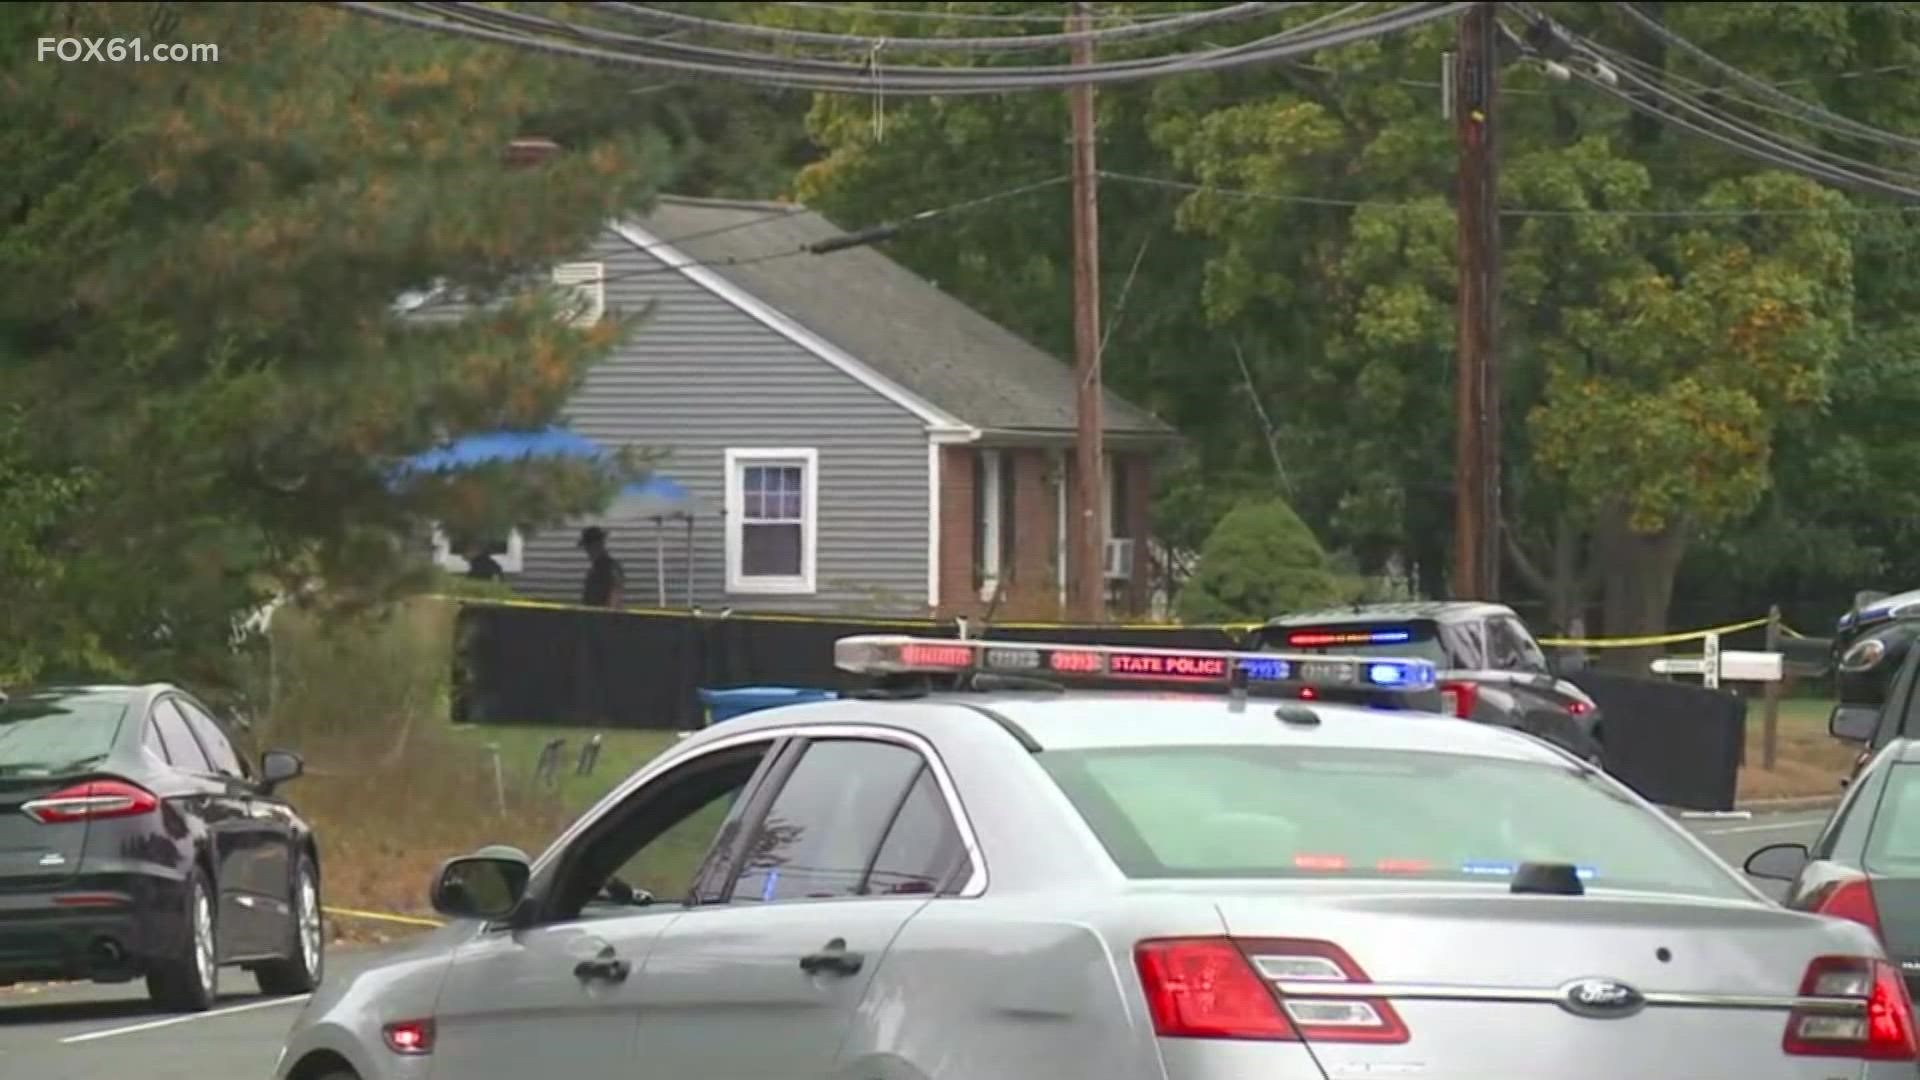 Two Bristol police officers were killed and one seriously injured in a shooting at a home on Redstone Hill Road late Wednesday, state police confirmed.